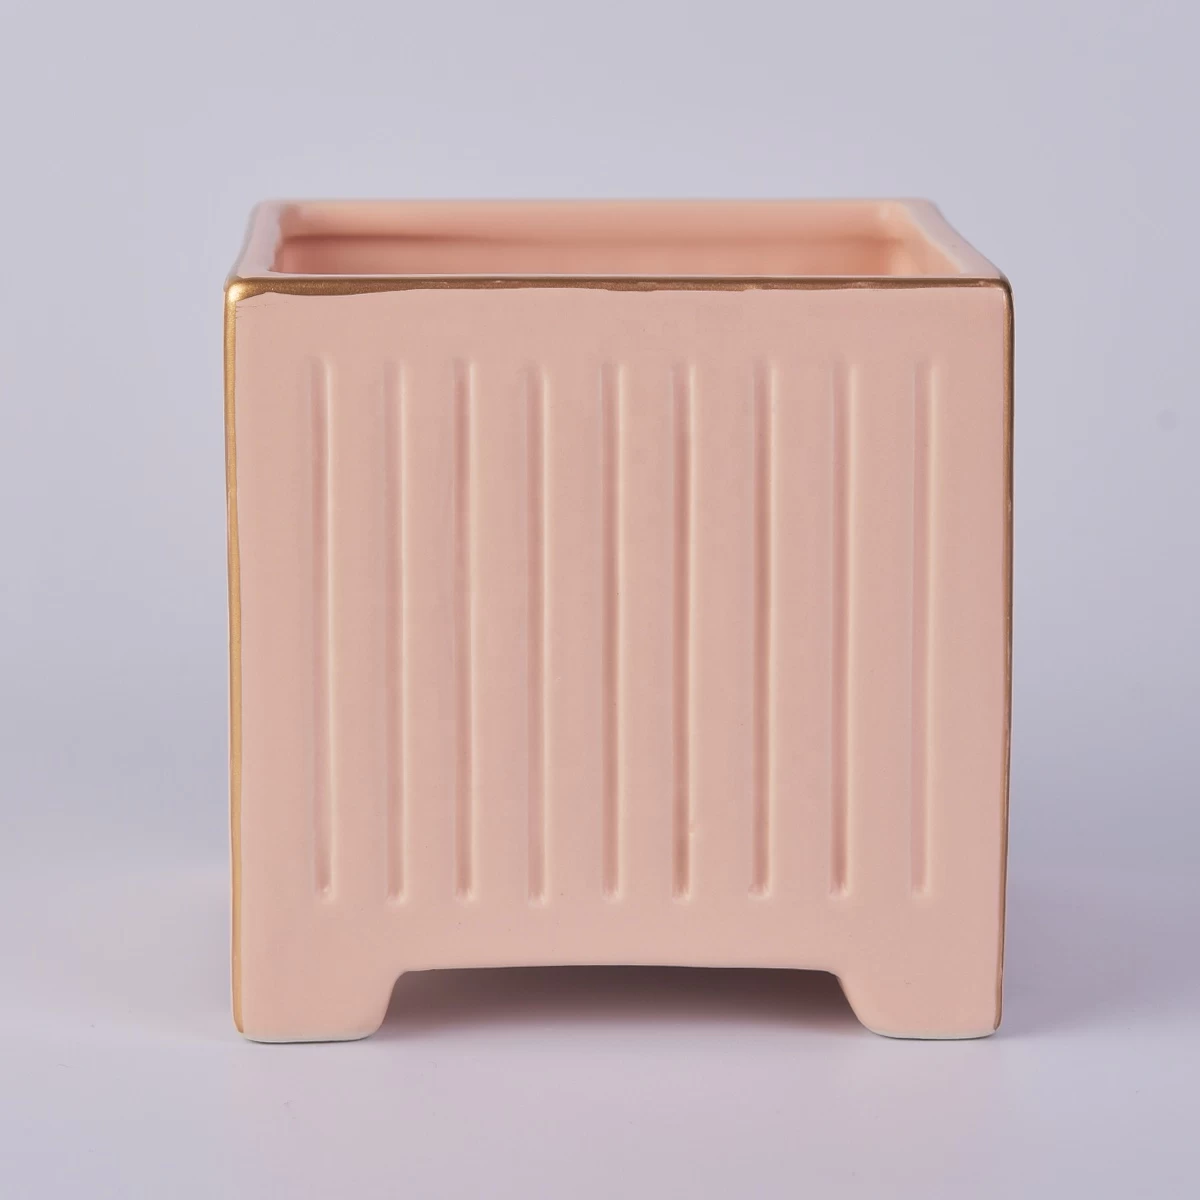 Sunny custom empty decorative pink square ceramic candle containers